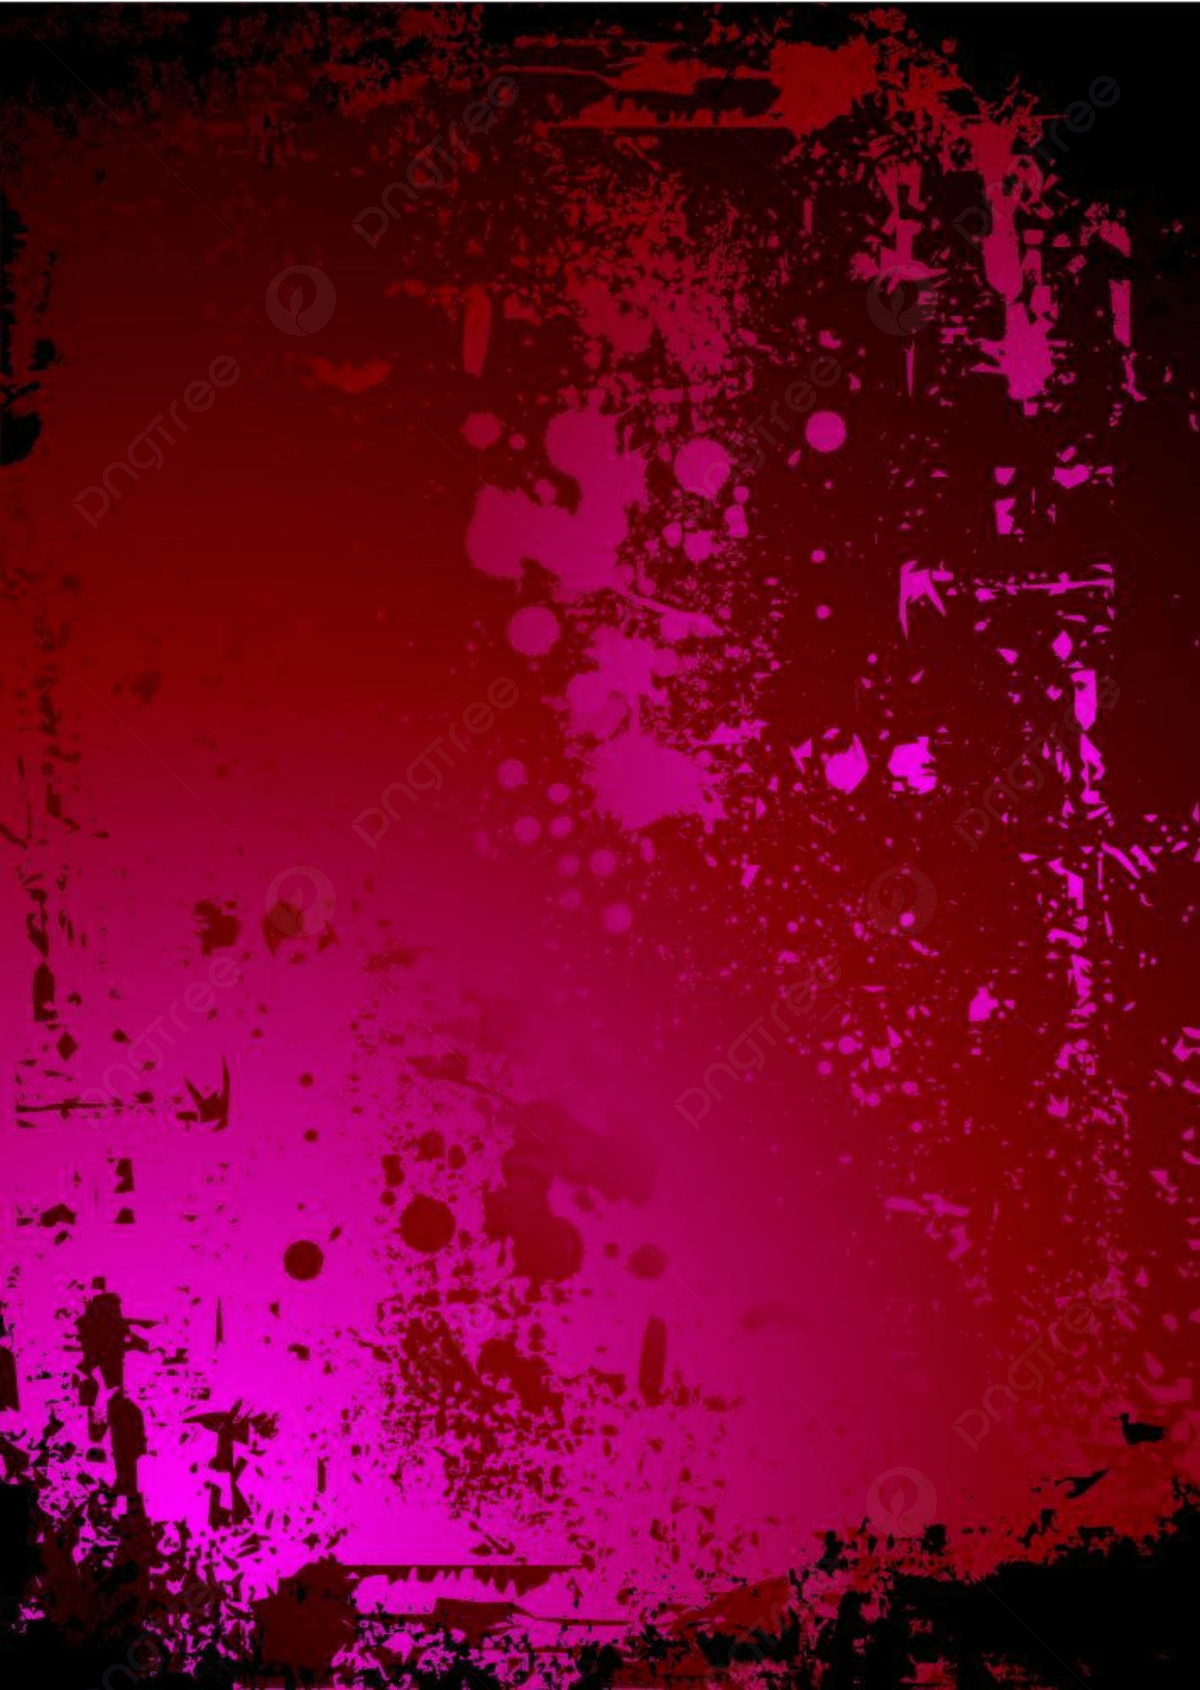 Grunge red and pink background with splashes of paint - Crimson